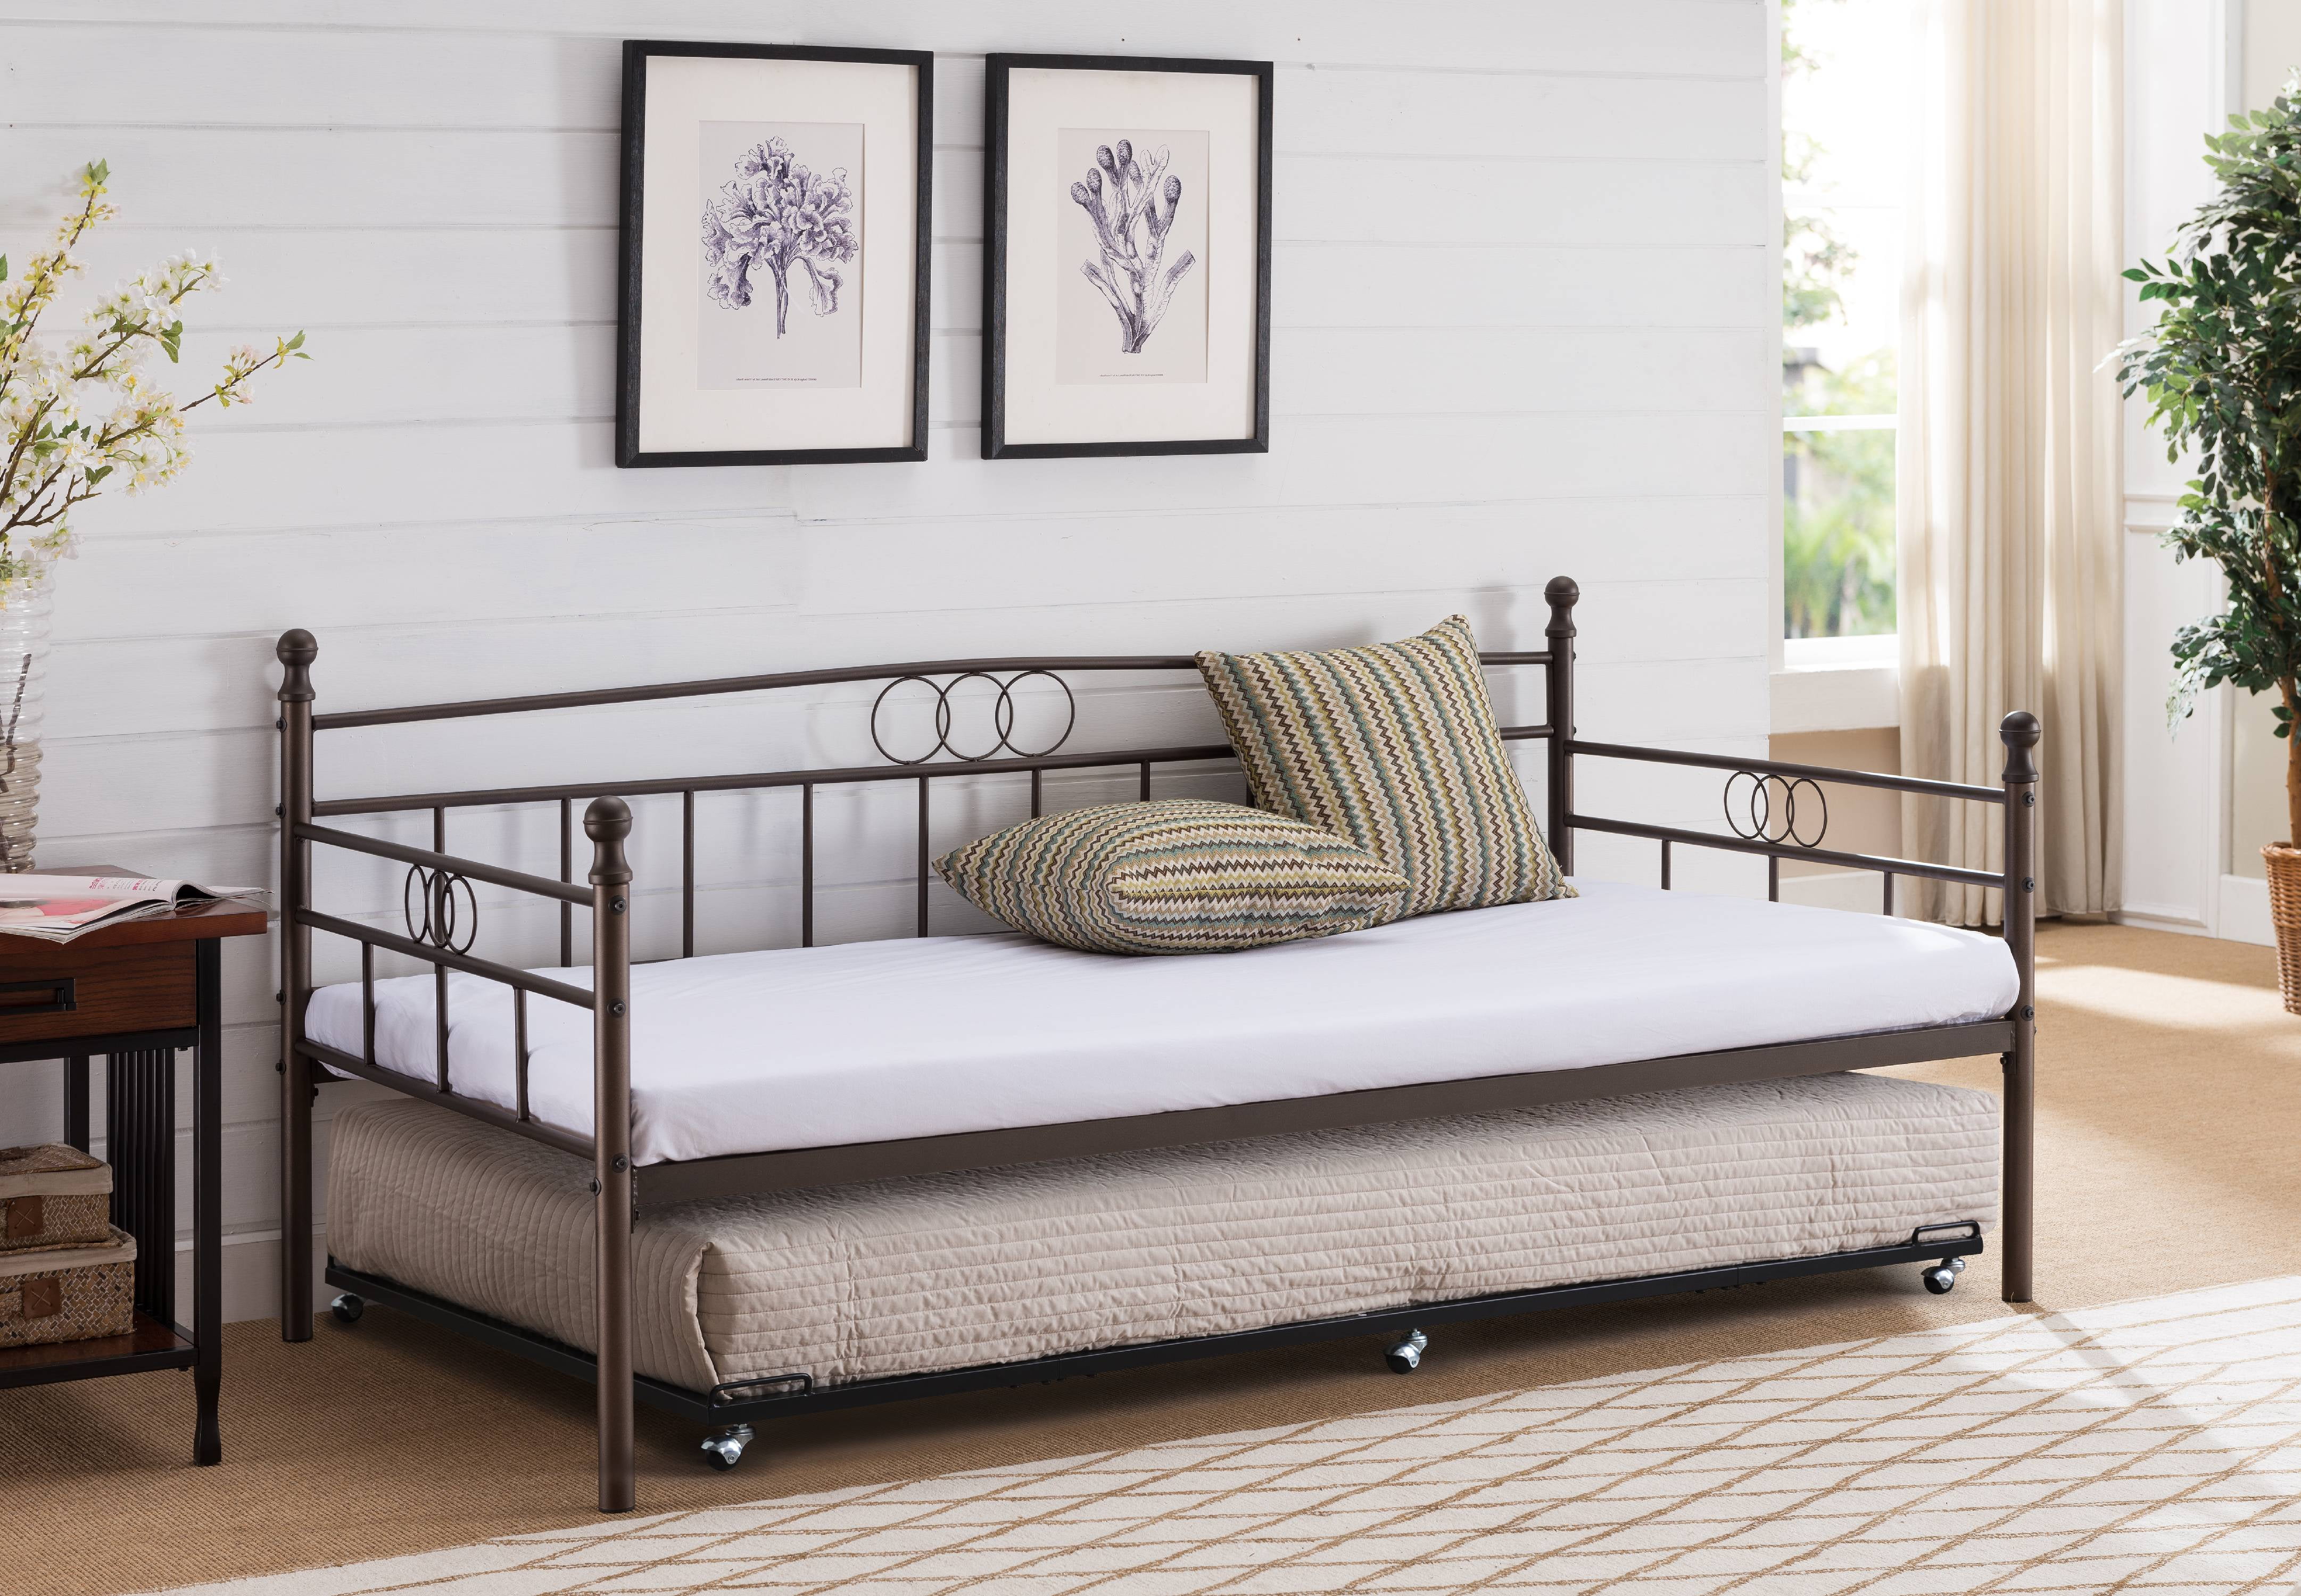 bed and mattresses set